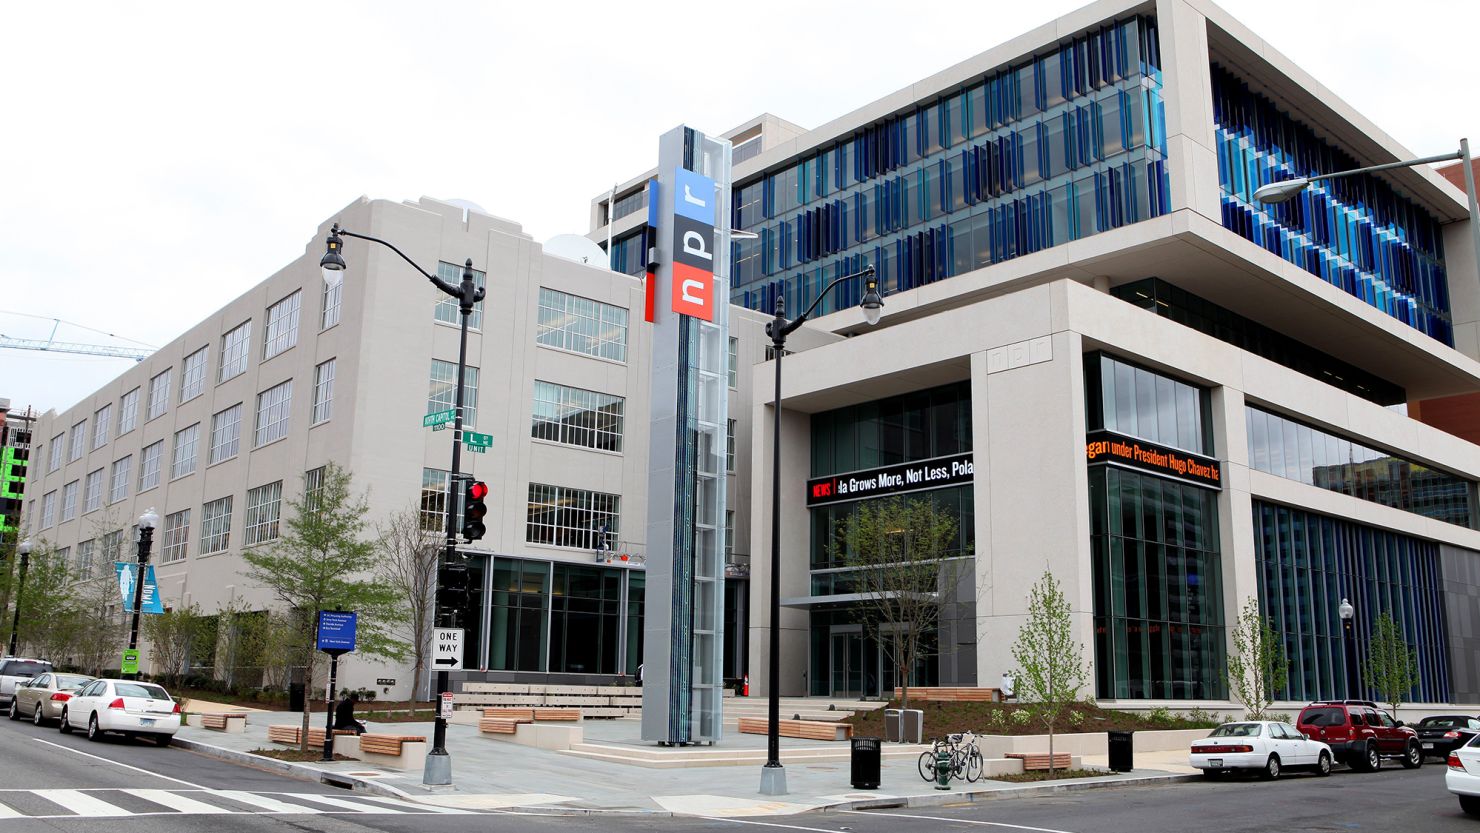 NPR (National Public Radio) is facing a backlash from the right wing media.